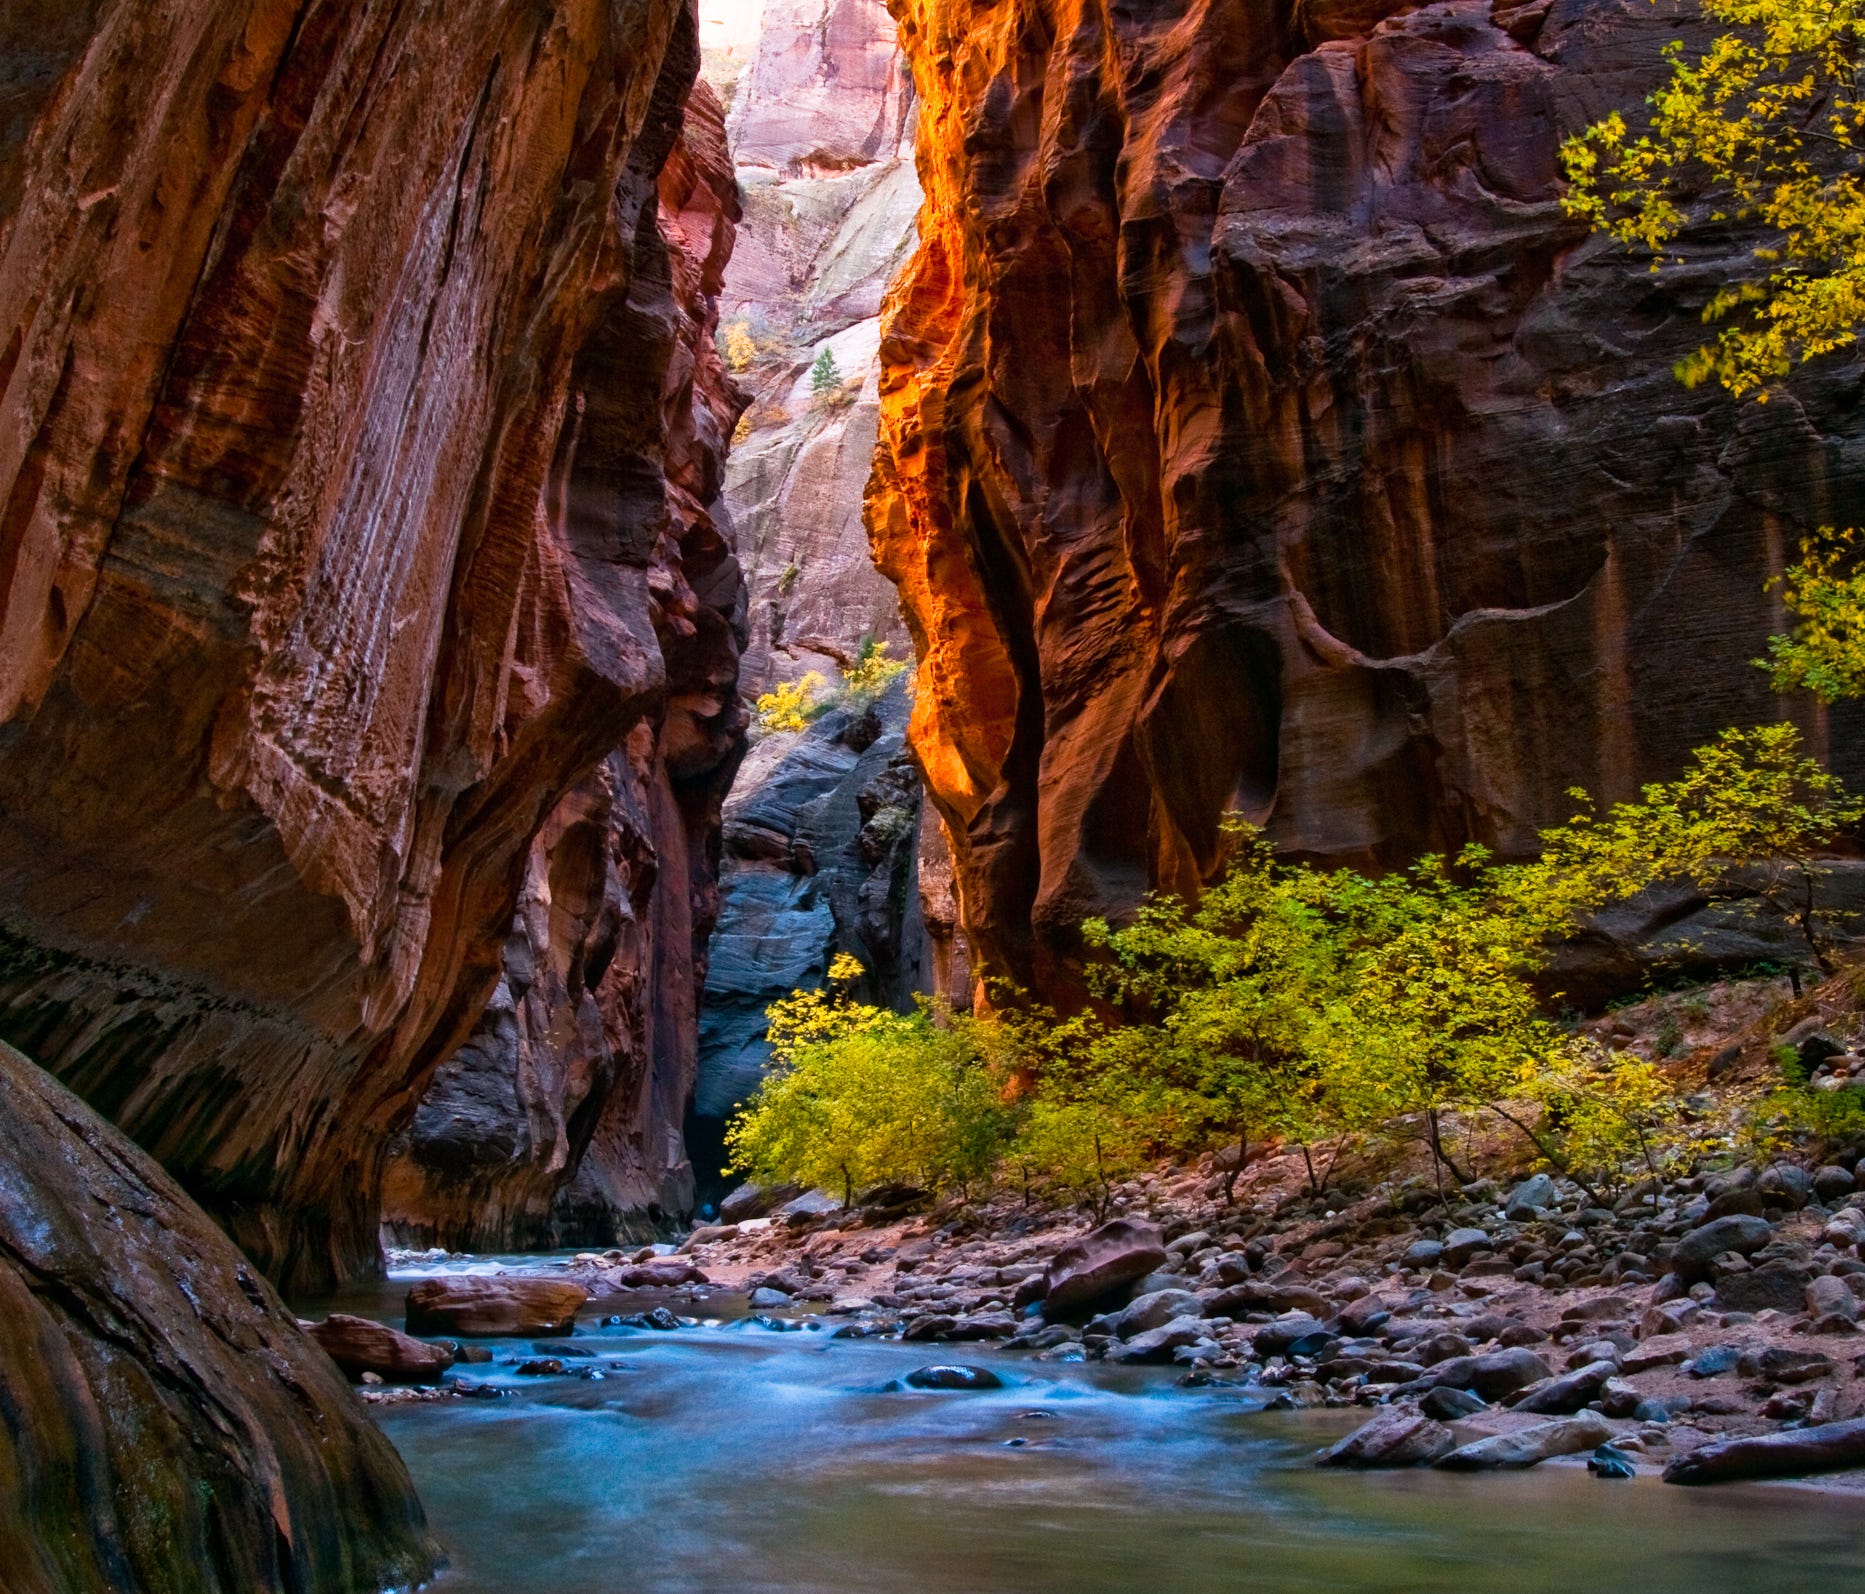 A gorgeous photo of the changing fall colors in Zion National Park. Kevin Roland captured this shot at one of the park's most popular areas -- the Narrows, a gorge with wall a thousand feet tall!